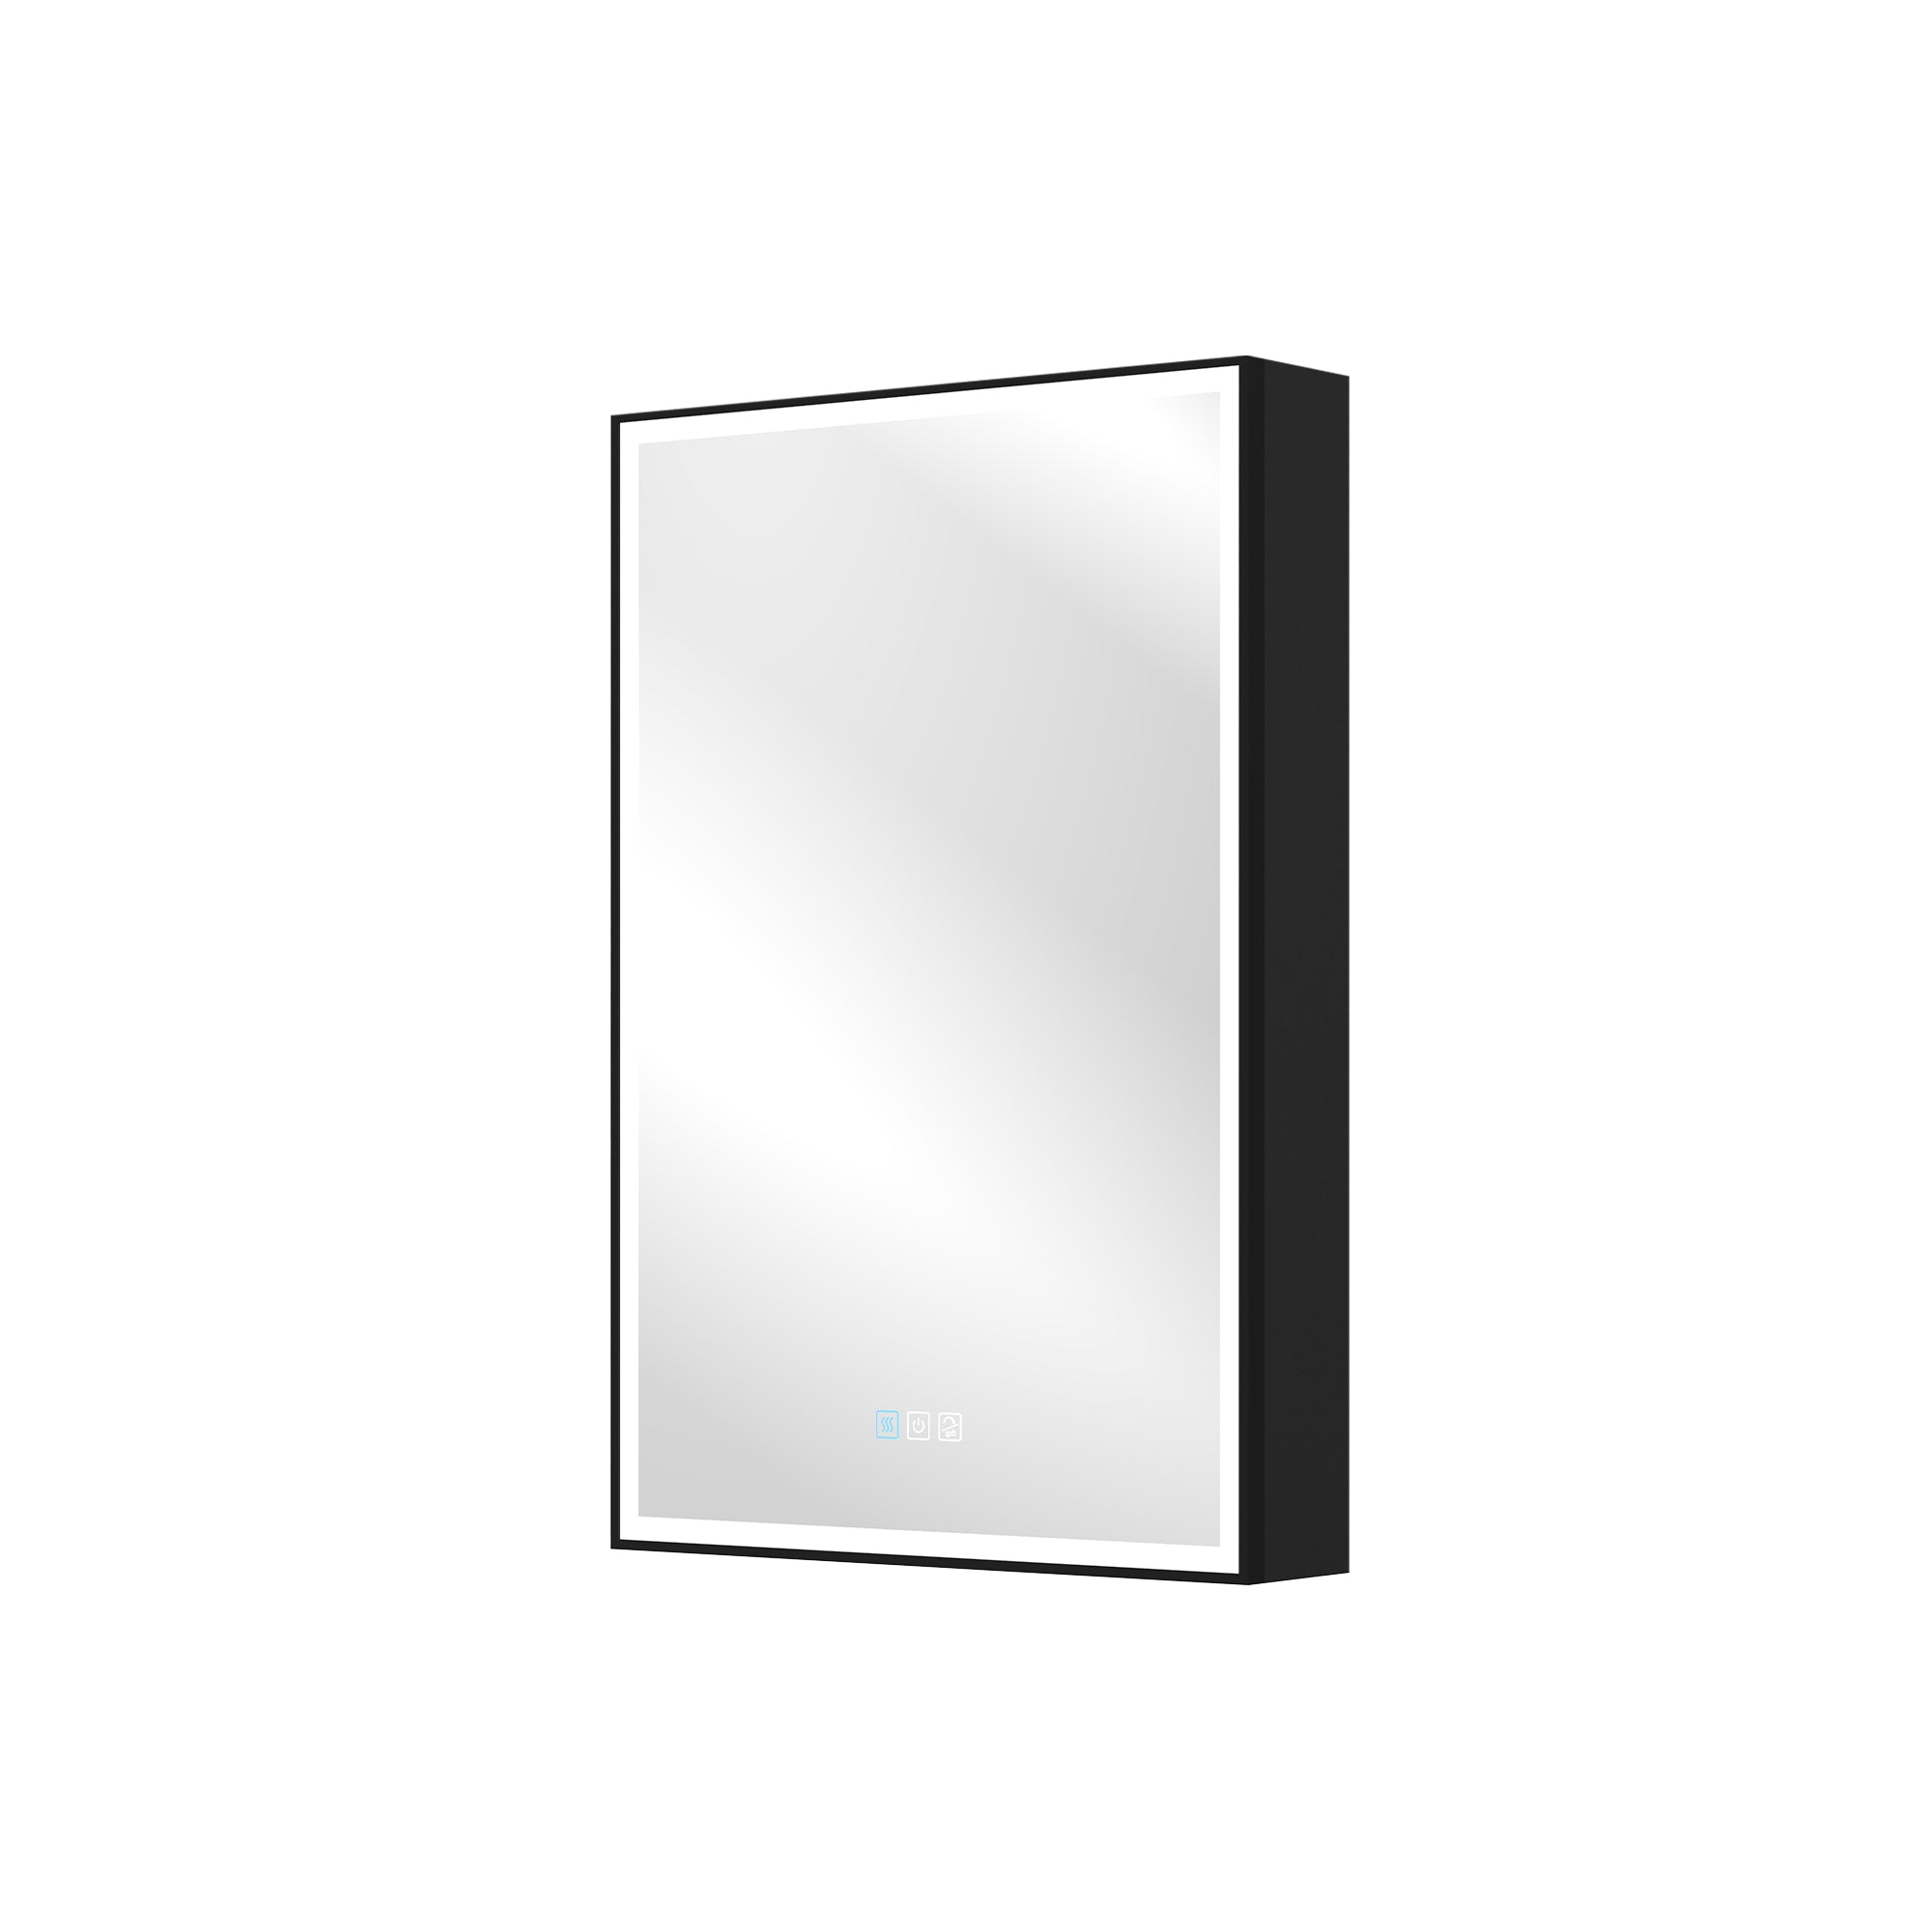 20 in. x 30 in. Black Aluminum Left Medicine Cabinet with Mirror and LED Light